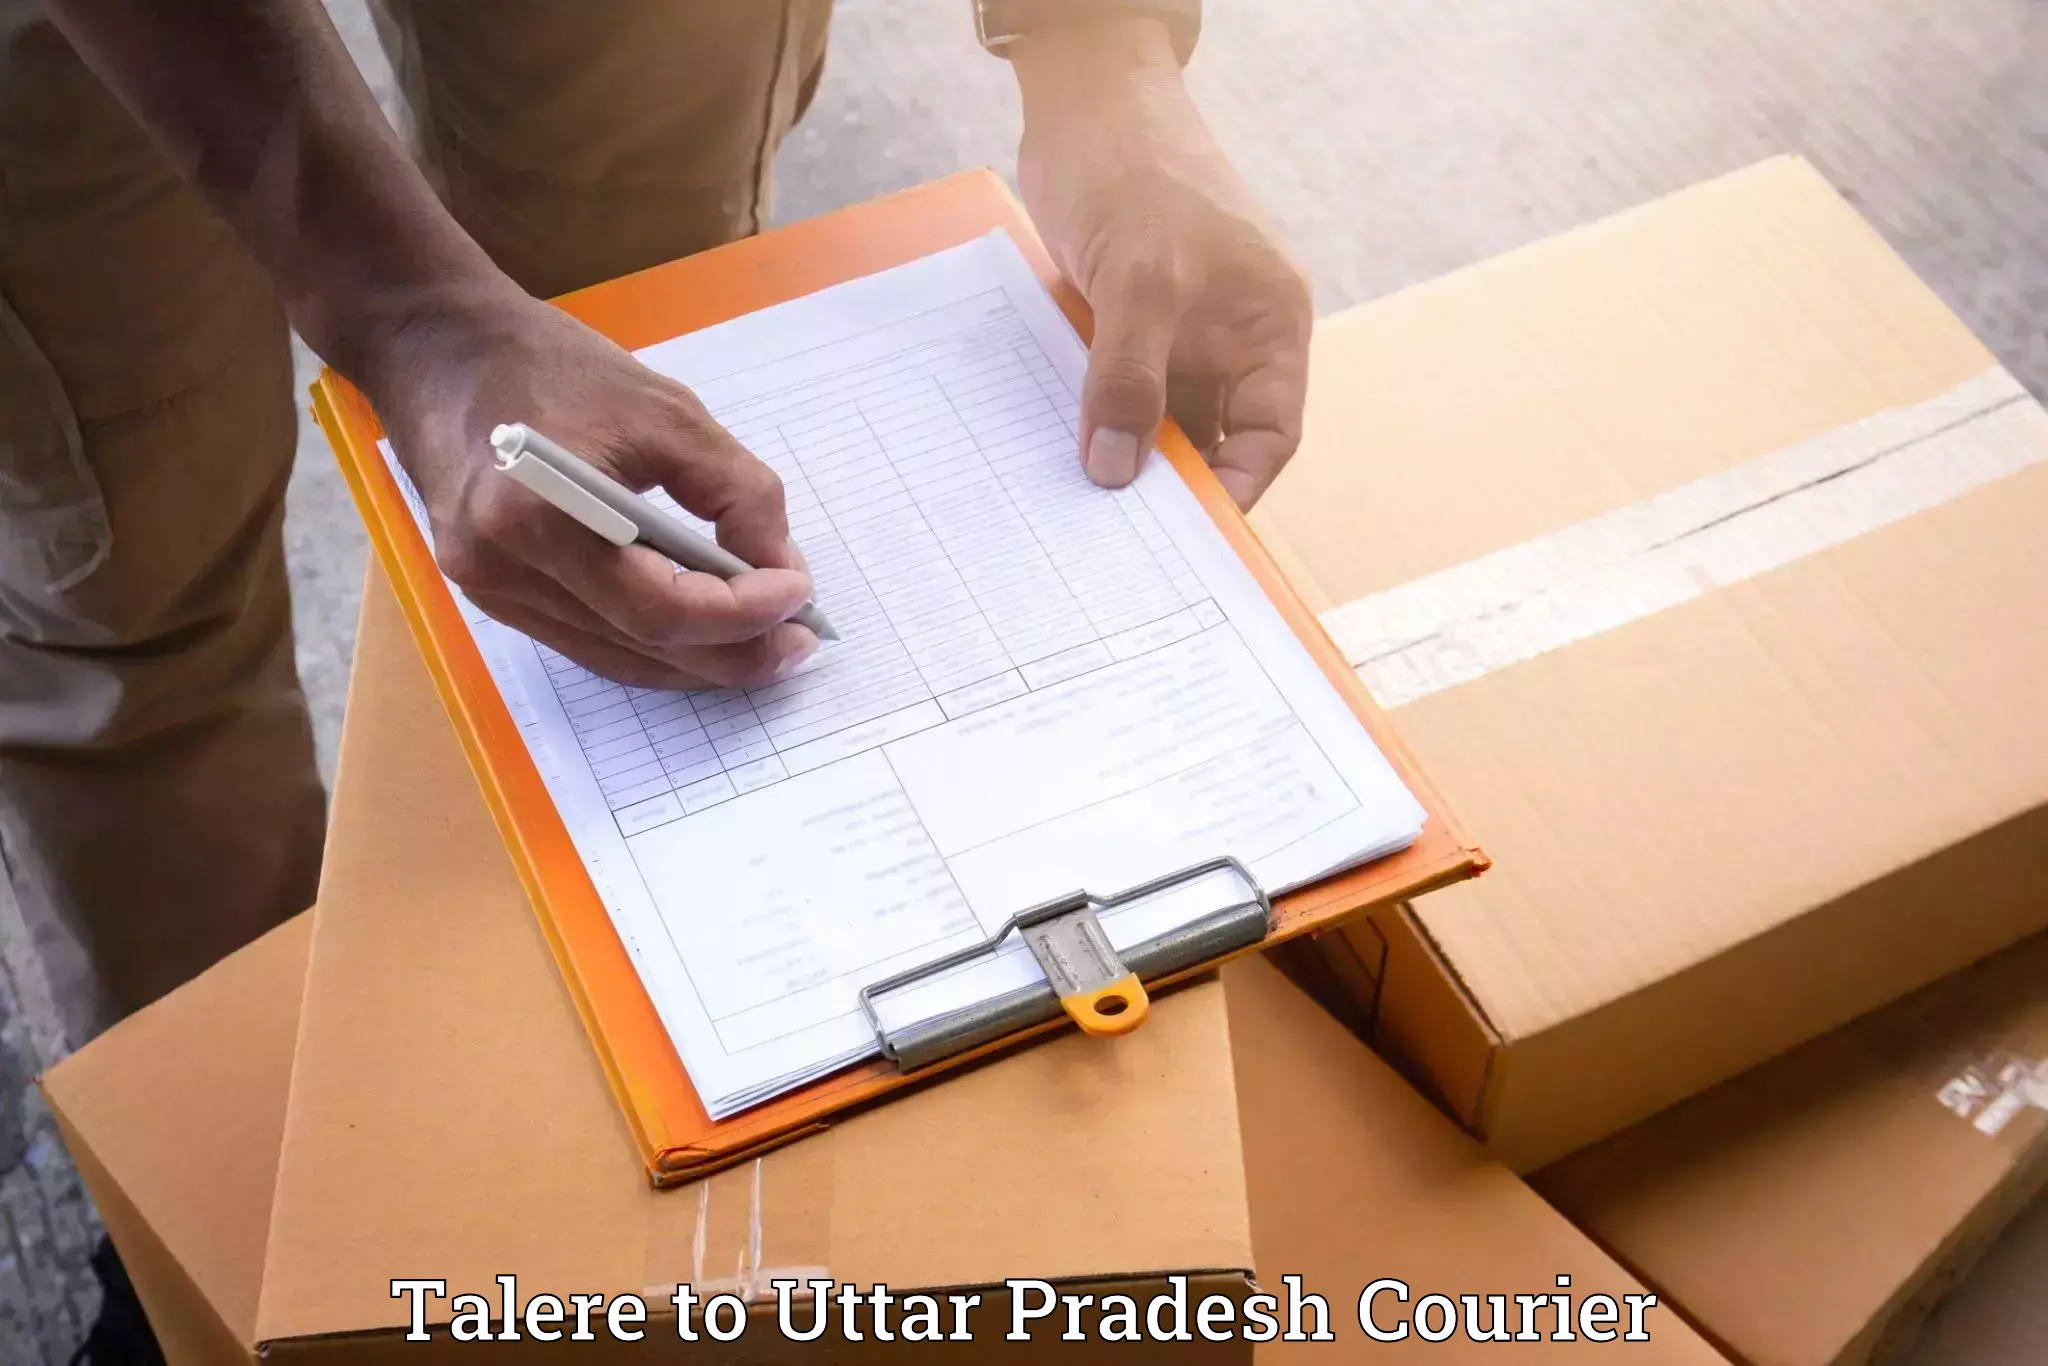 Quality relocation services Talere to Saharanpur